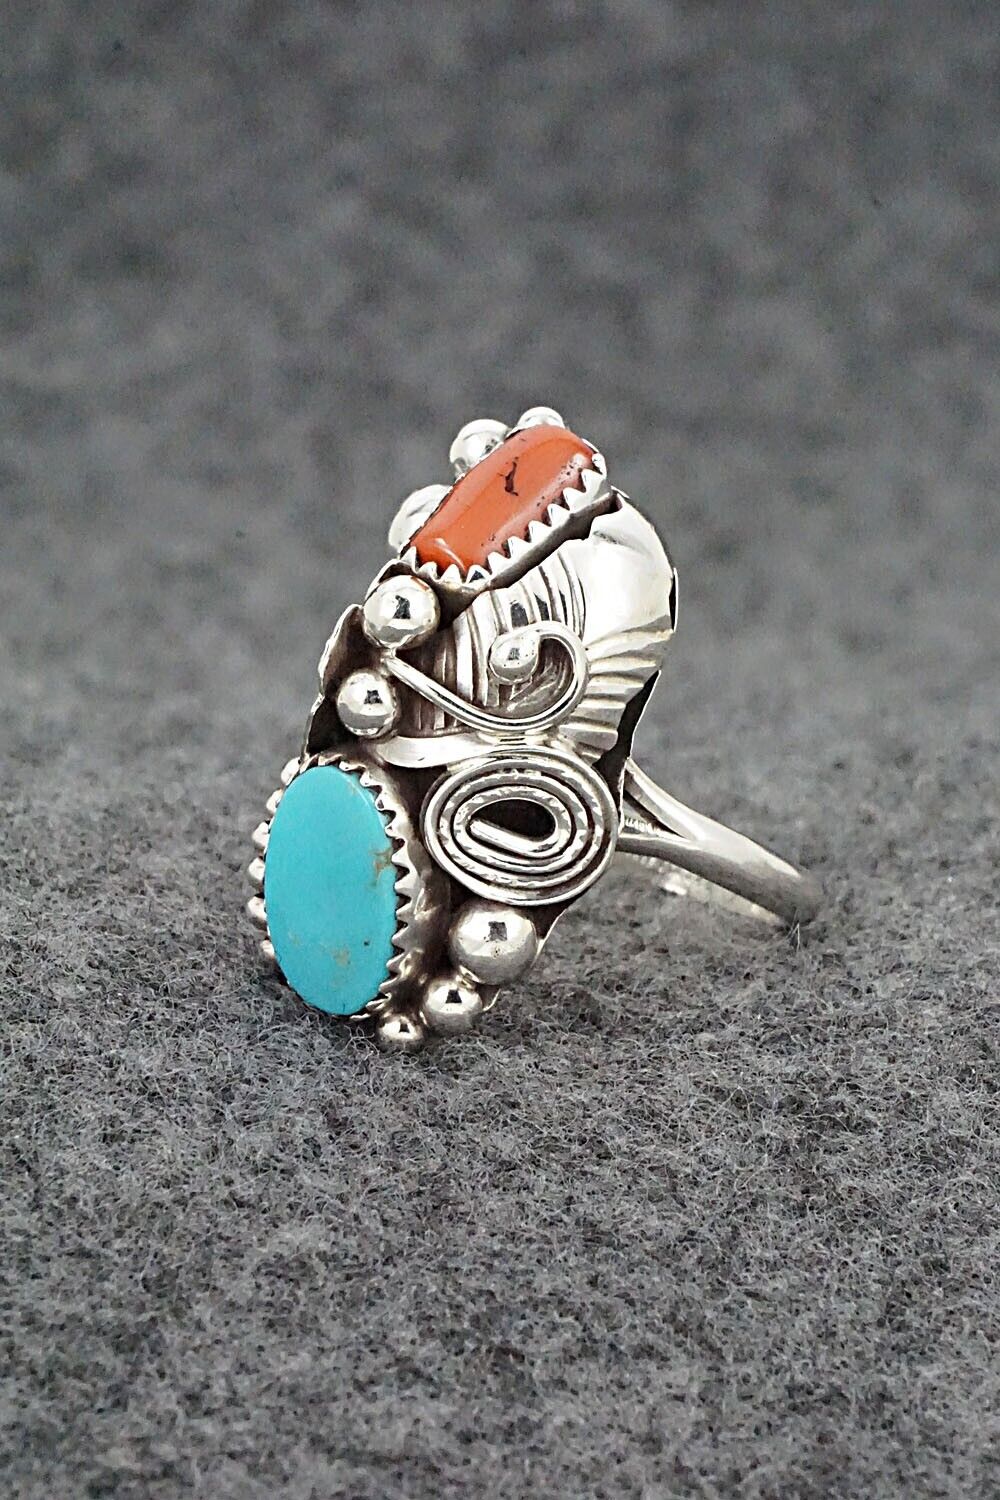 Turquoise, Coral & Sterling Silver Ring - Max Calladitto - Size 8.5